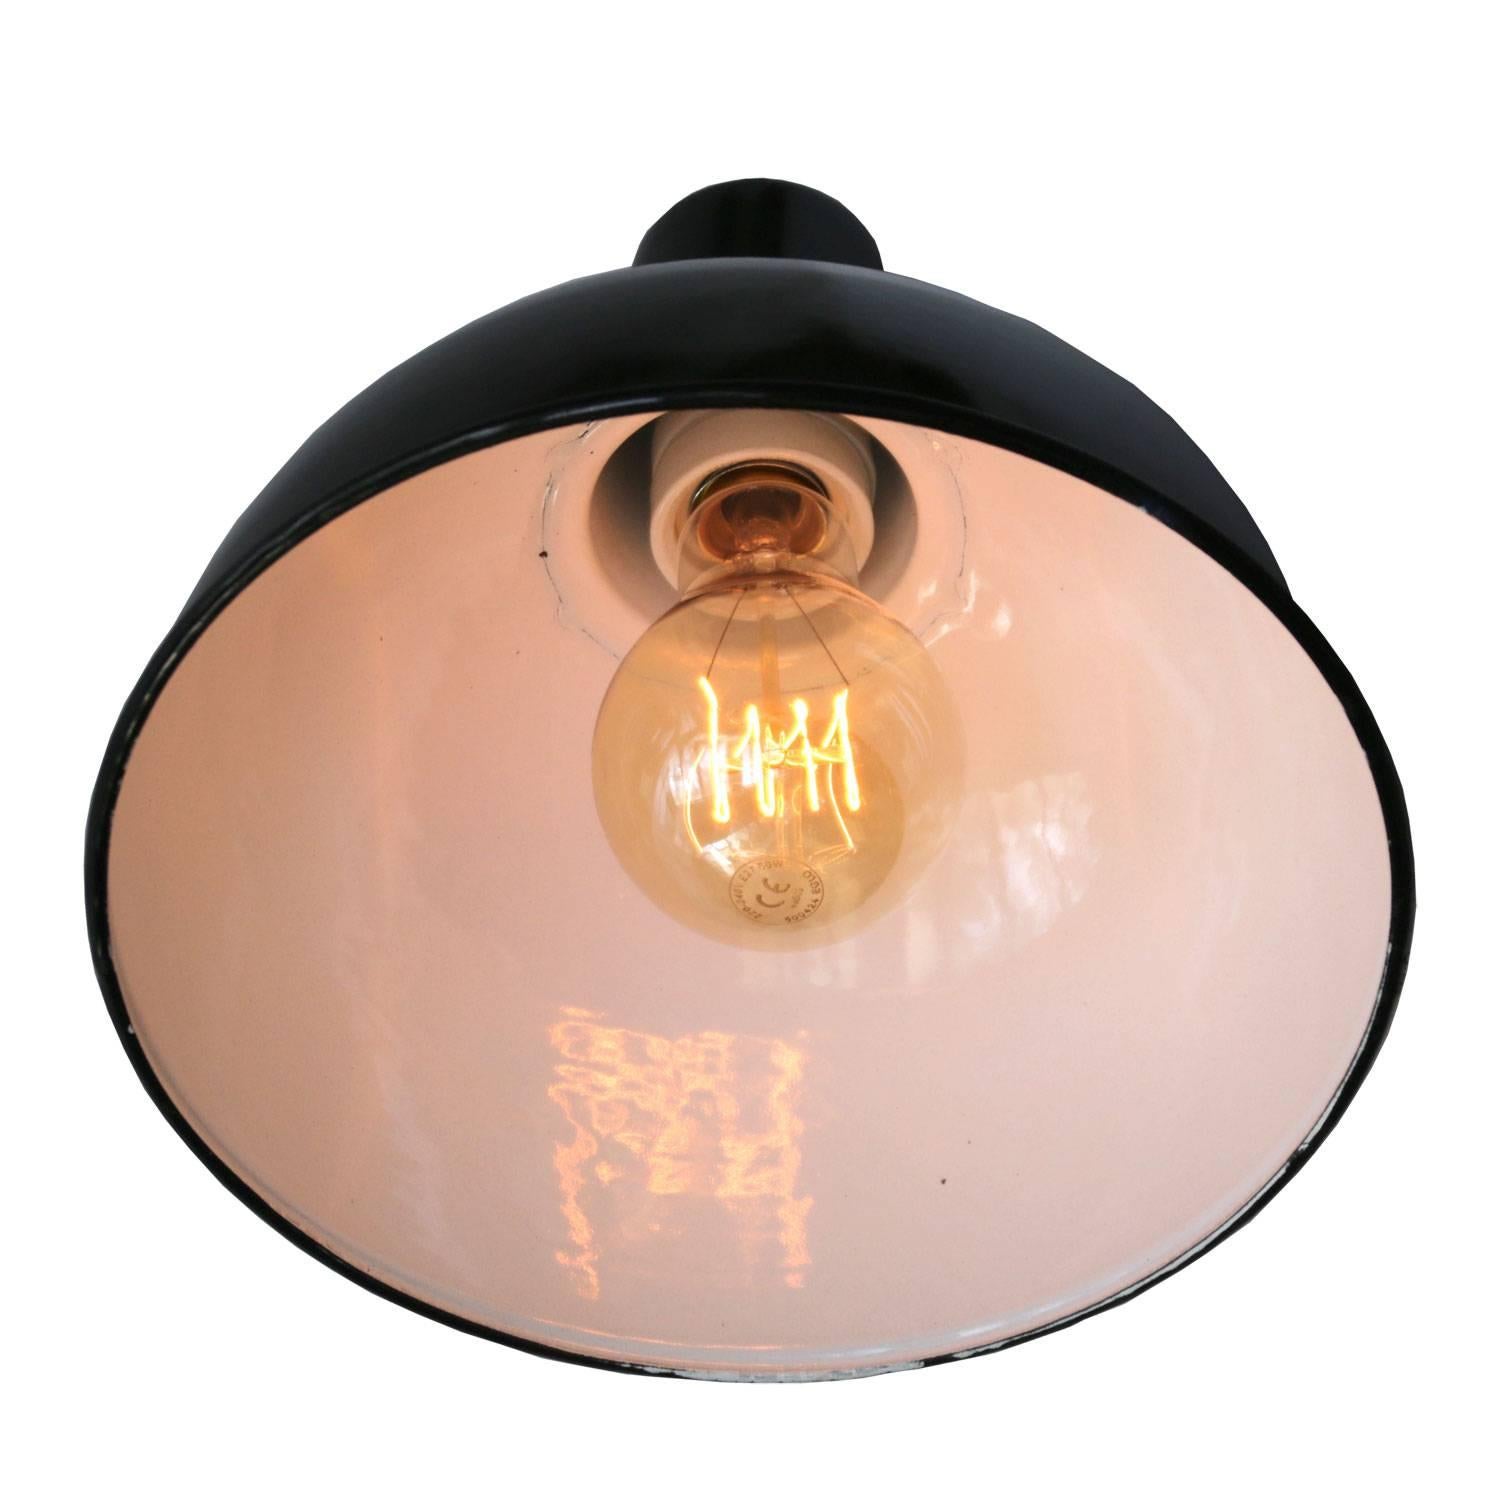 Factory hanging light. Black enamel. White interior.
Brass strain relief with 2 meter wire.  

Measure: Weight: 1.0 kg / 2.2 lb

Priced individual item. All lamps have been made suitable by international standards for incandescent light bulbs,